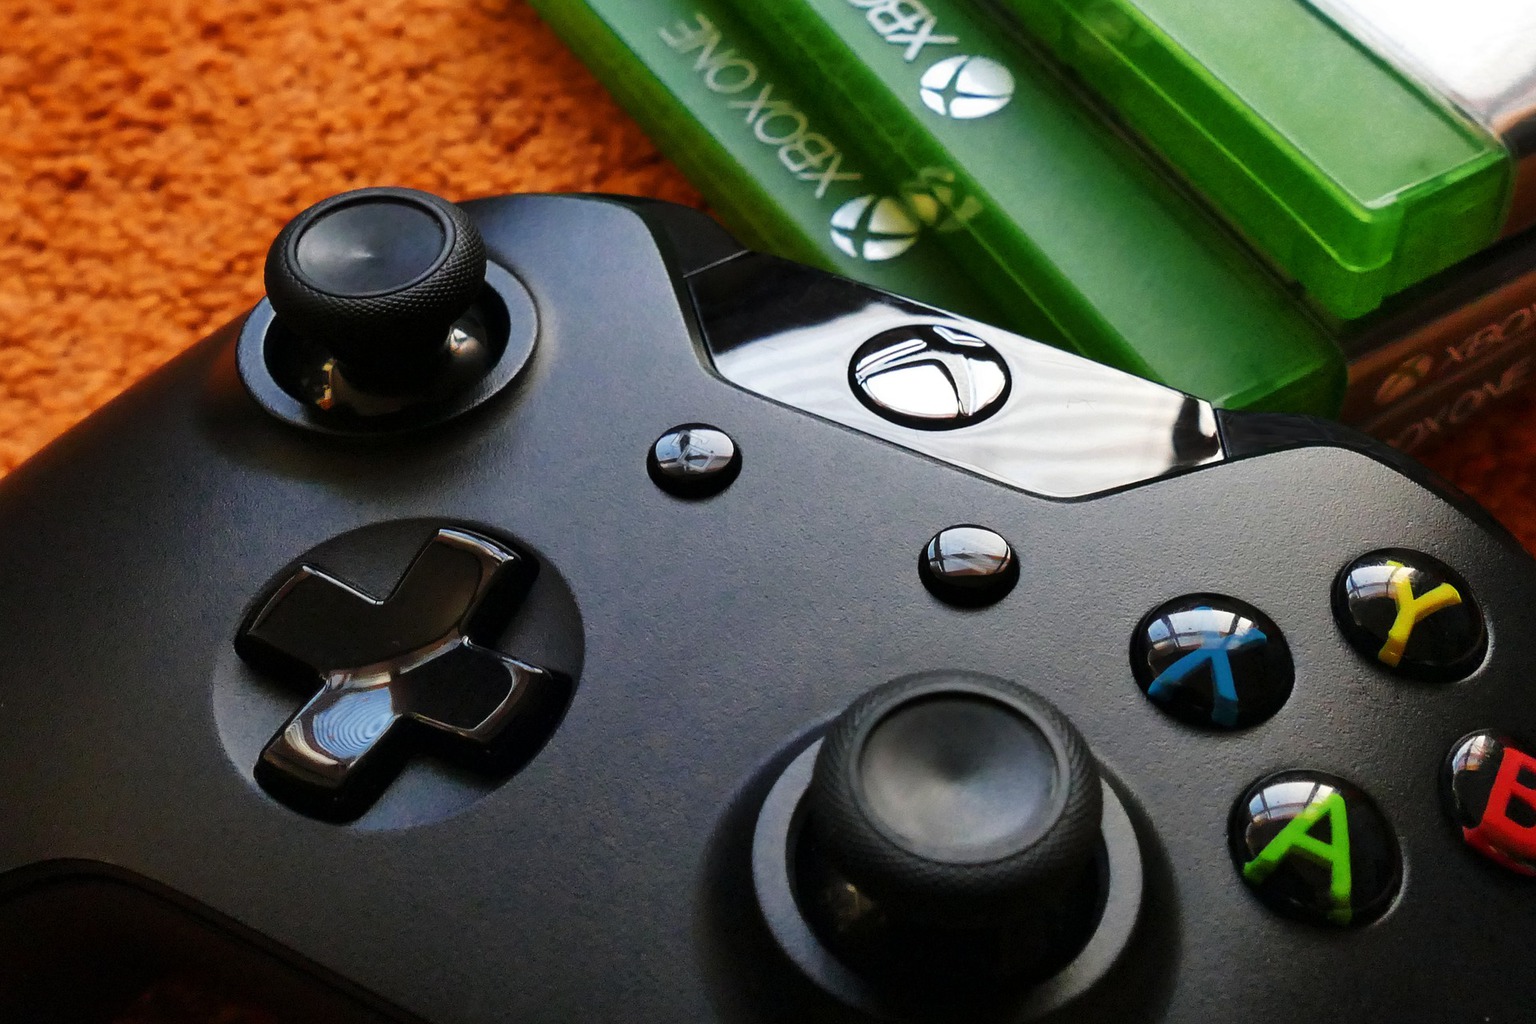 A controller, which is one best xbox one accessories, and a stack of game boxes.